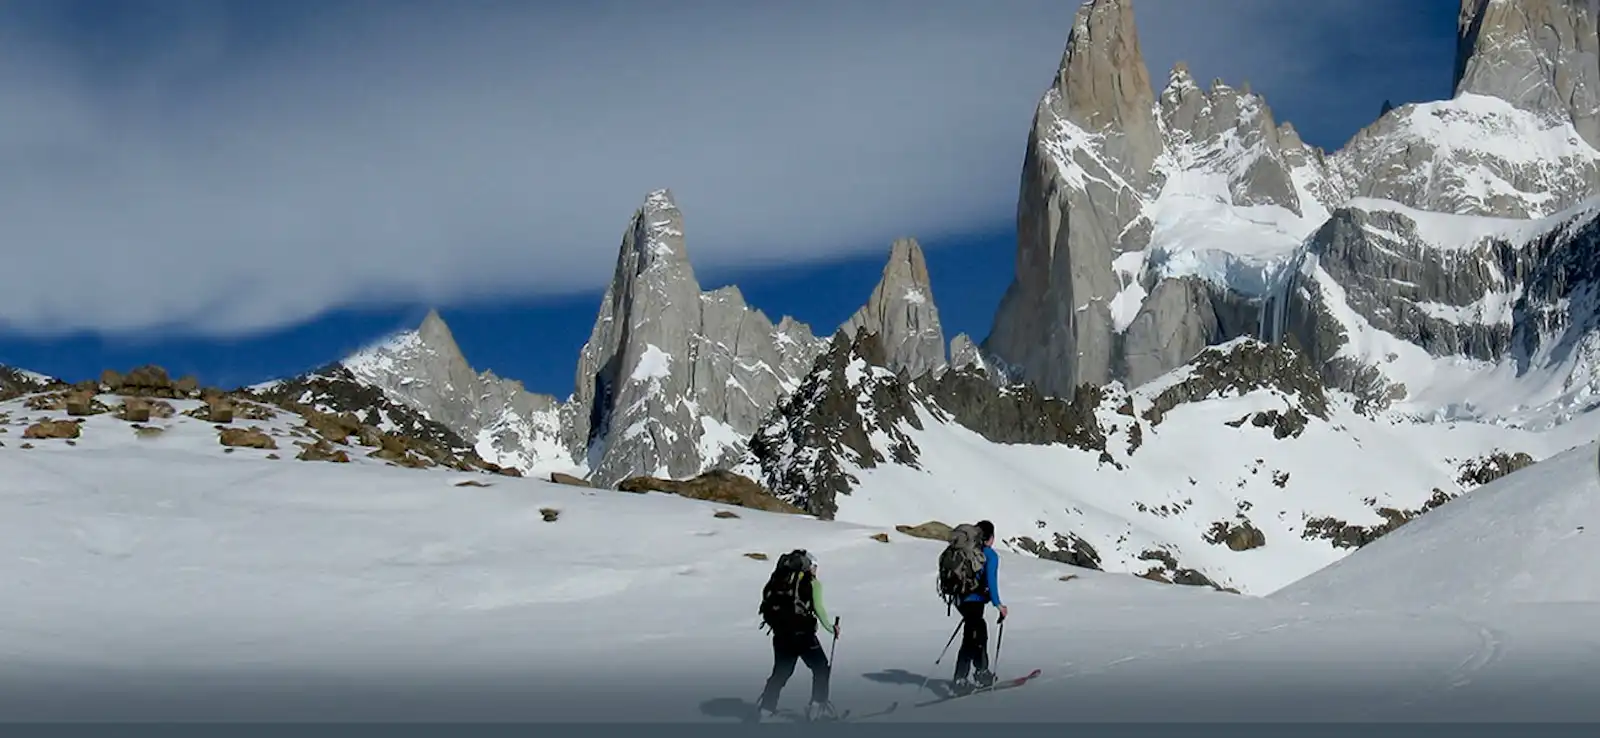 A Guide to Backcountry Ski Tours in El Chaltén and Other Amazing Spots in Patagonia post image